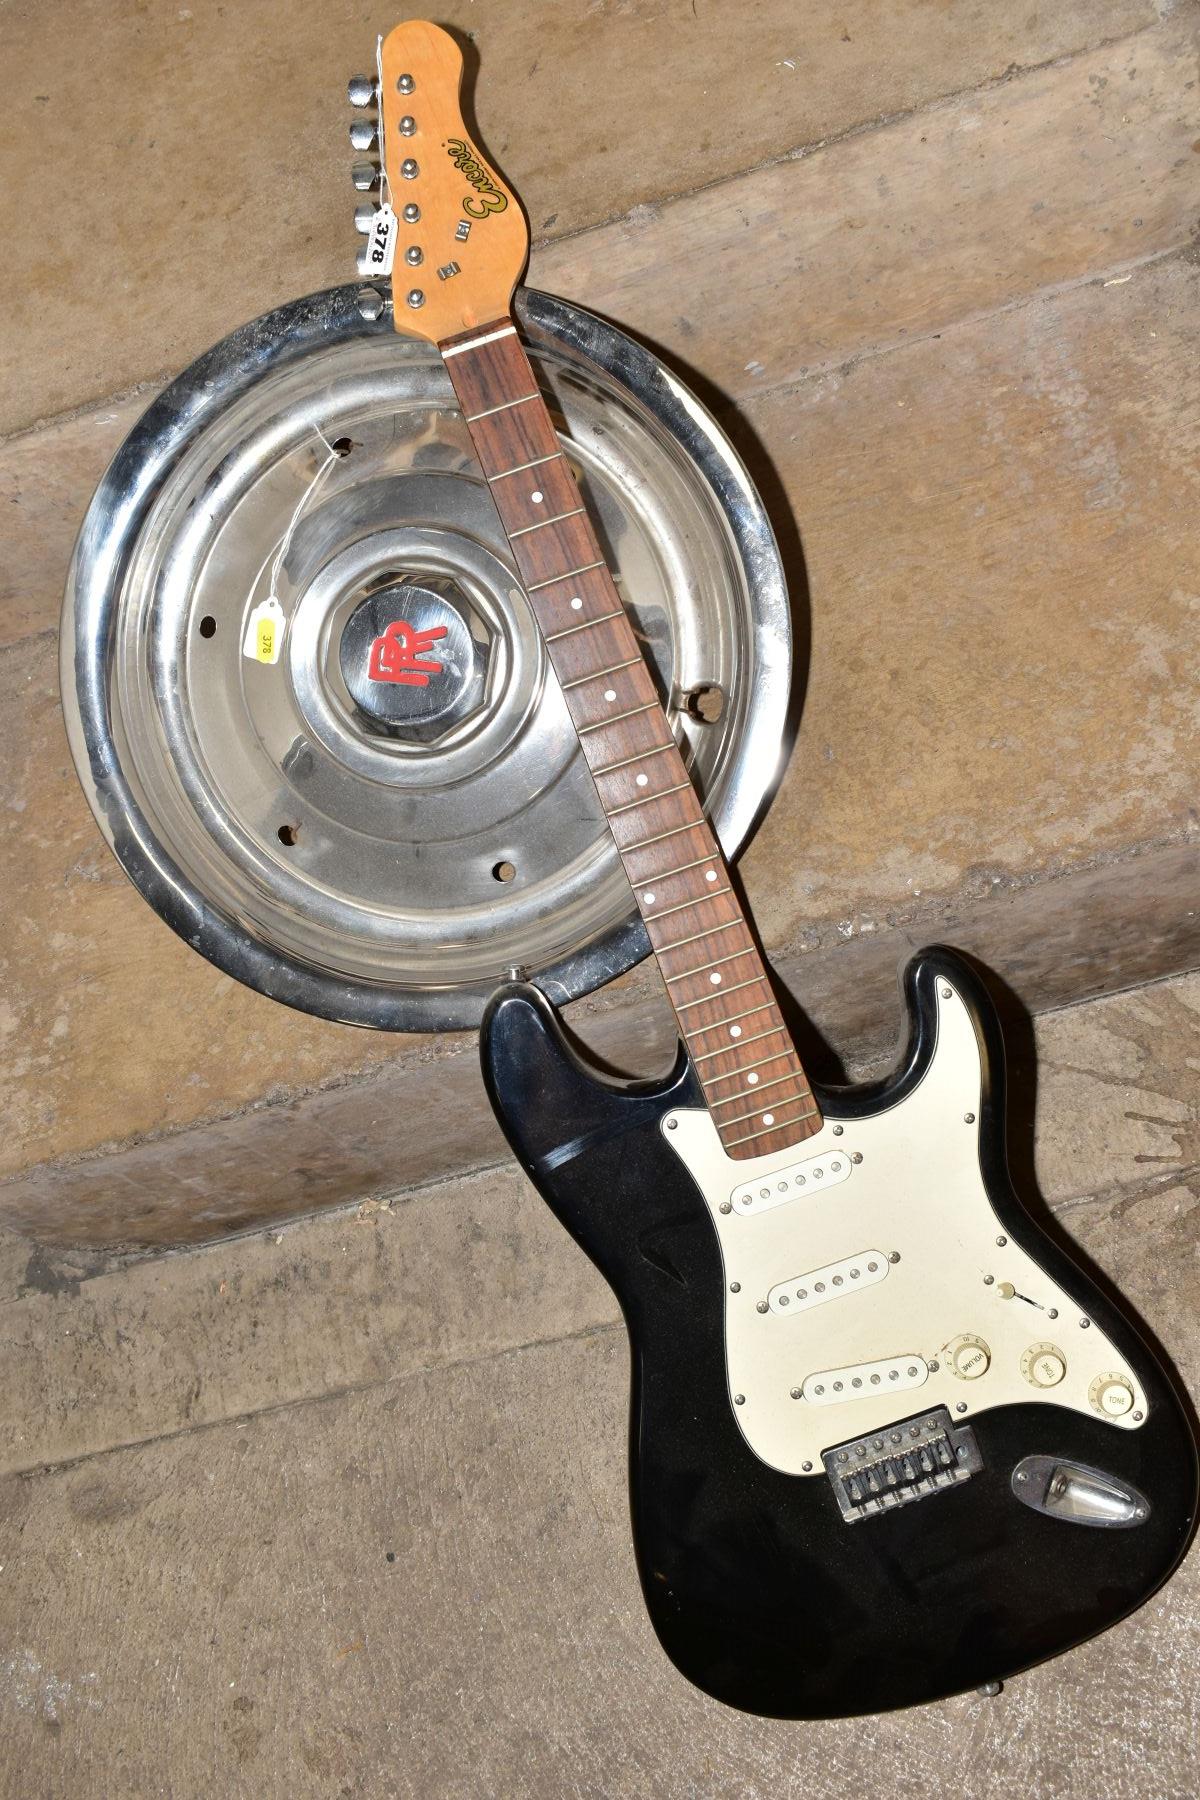 A ROLLS ROYCE HUB CAP AND AN ENCORE STRAT TYPE GUITAR, in black with white scratch plate, three